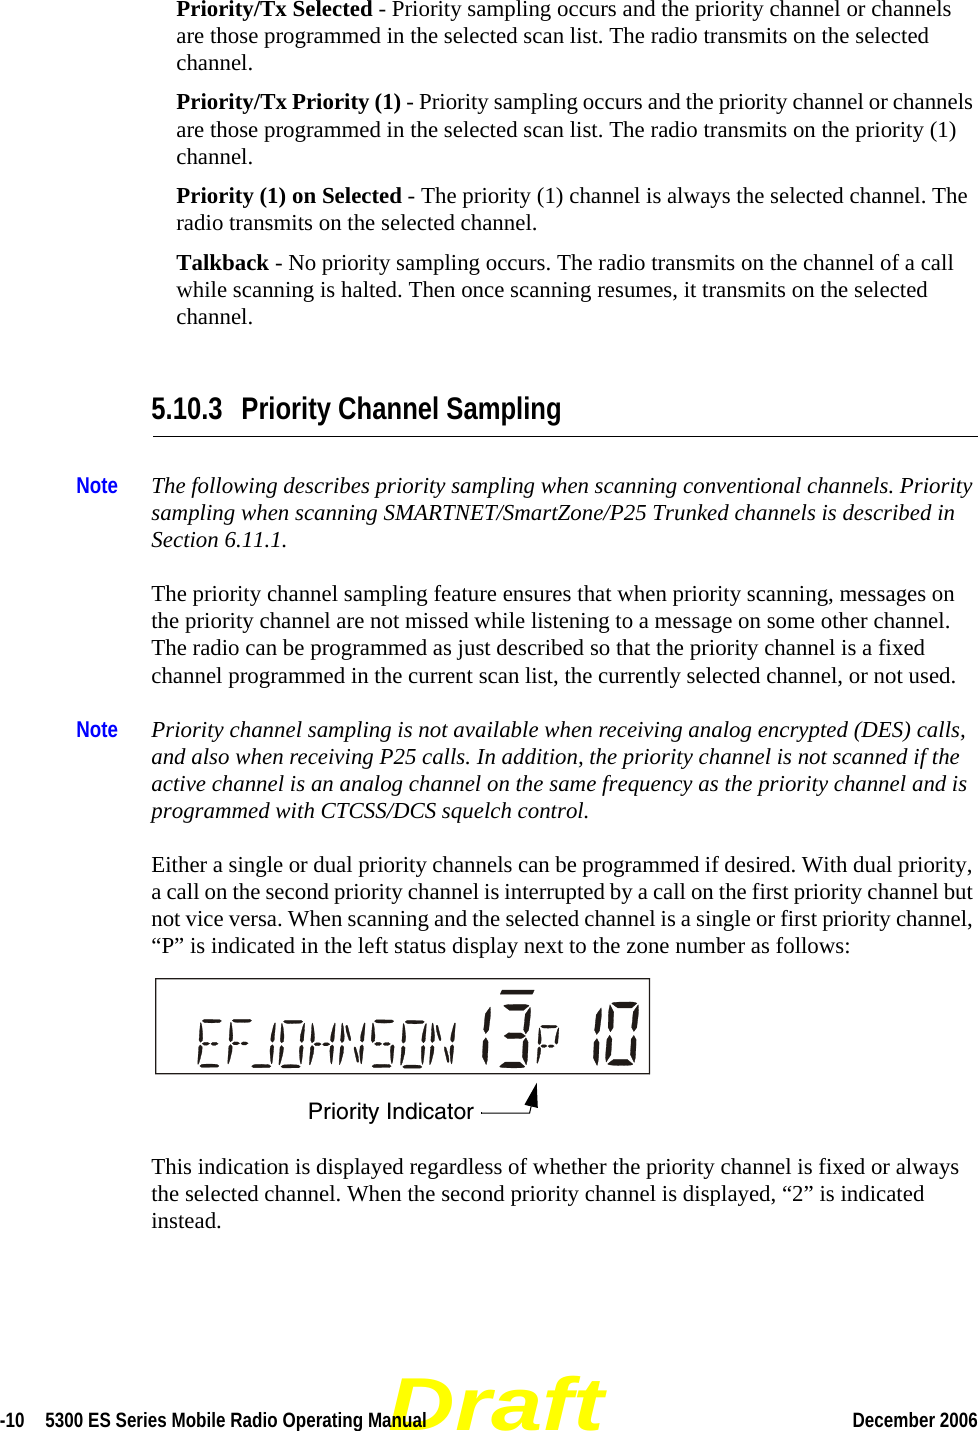 Draft-10  5300 ES Series Mobile Radio Operating Manual December 2006 Priority/Tx Selected - Priority sampling occurs and the priority channel or channels are those programmed in the selected scan list. The radio transmits on the selected channel.Priority/Tx Priority (1) - Priority sampling occurs and the priority channel or channels are those programmed in the selected scan list. The radio transmits on the priority (1) channel.Priority (1) on Selected - The priority (1) channel is always the selected channel. The radio transmits on the selected channel.Talkback - No priority sampling occurs. The radio transmits on the channel of a call while scanning is halted. Then once scanning resumes, it transmits on the selected channel.5.10.3 Priority Channel SamplingNote The following describes priority sampling when scanning conventional channels. Priority sampling when scanning SMARTNET/SmartZone/P25 Trunked channels is described in Section 6.11.1.The priority channel sampling feature ensures that when priority scanning, messages on the priority channel are not missed while listening to a message on some other channel. The radio can be programmed as just described so that the priority channel is a fixed channel programmed in the current scan list, the currently selected channel, or not used.Note Priority channel sampling is not available when receiving analog encrypted (DES) calls, and also when receiving P25 calls. In addition, the priority channel is not scanned if the active channel is an analog channel on the same frequency as the priority channel and is programmed with CTCSS/DCS squelch control.Either a single or dual priority channels can be programmed if desired. With dual priority, a call on the second priority channel is interrupted by a call on the first priority channel but not vice versa. When scanning and the selected channel is a single or first priority channel, “P” is indicated in the left status display next to the zone number as follows: This indication is displayed regardless of whether the priority channel is fixed or always the selected channel. When the second priority channel is displayed, “2” is indicated instead.Priority Indicator